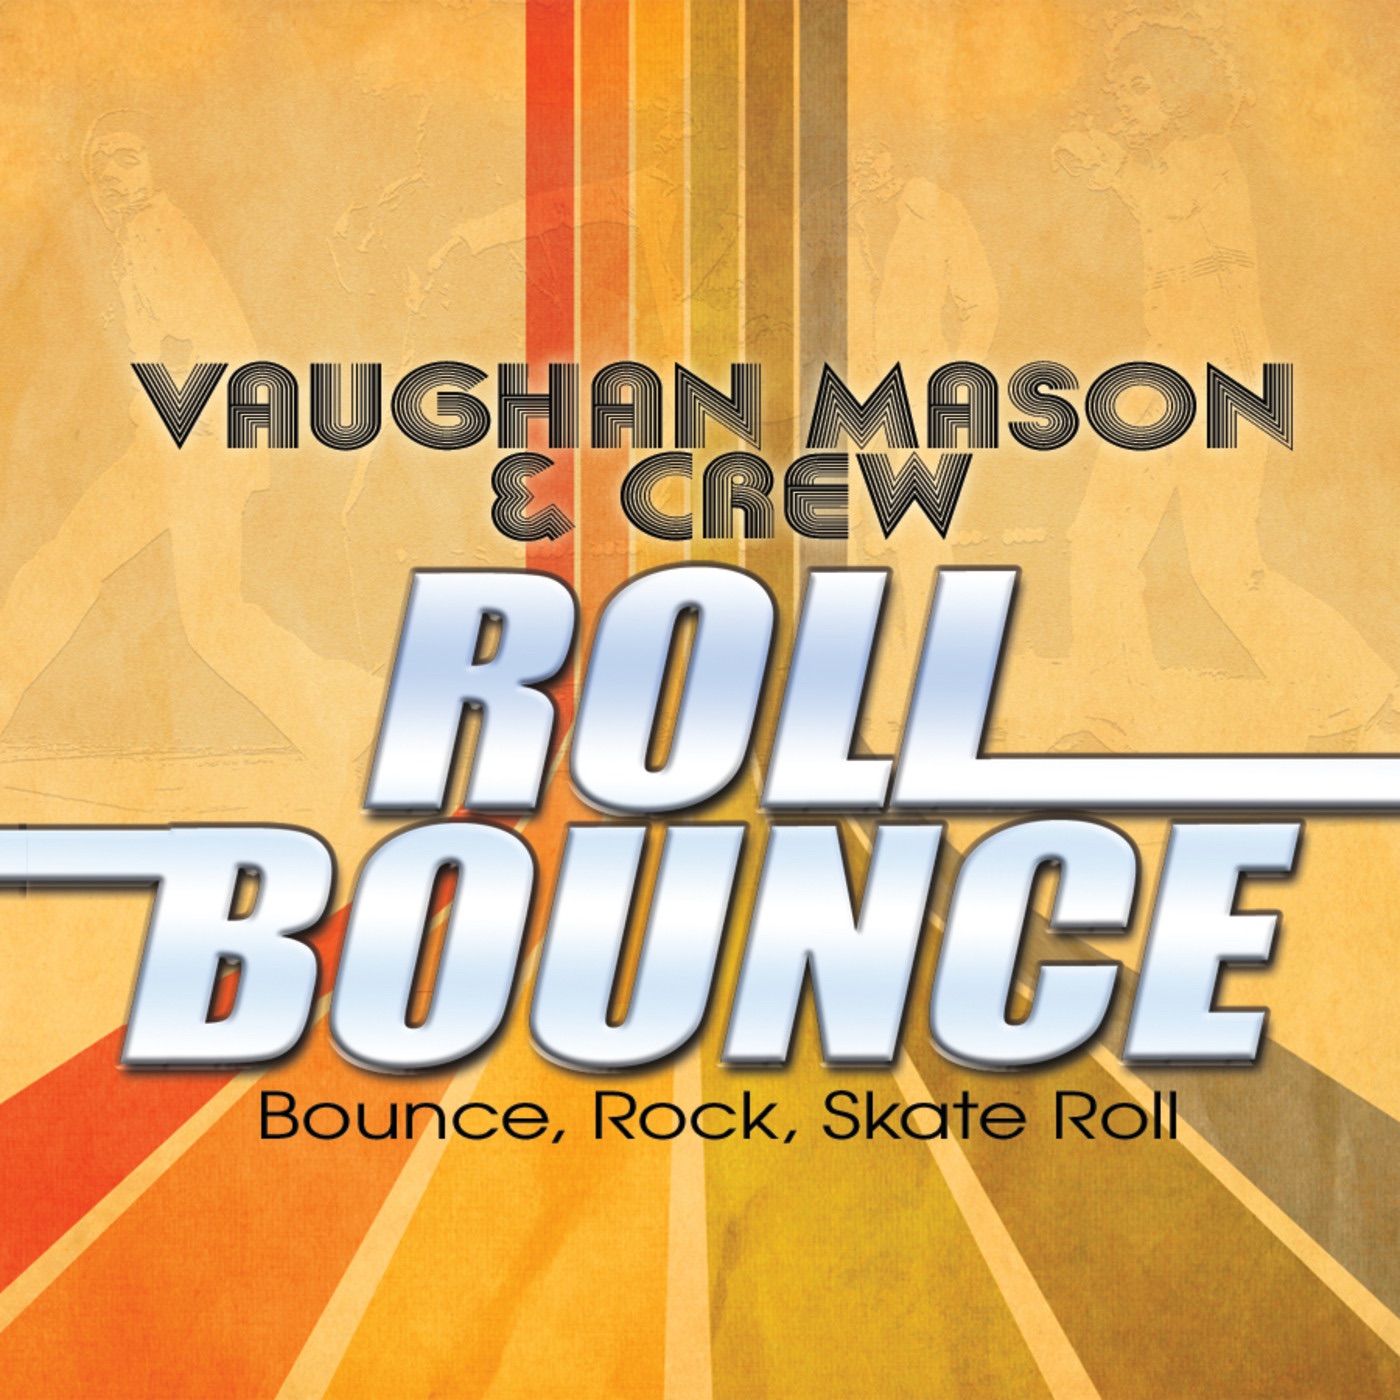 Art for Bounce, Rock, Skate, Roll  by Vaughan Mason and Crew